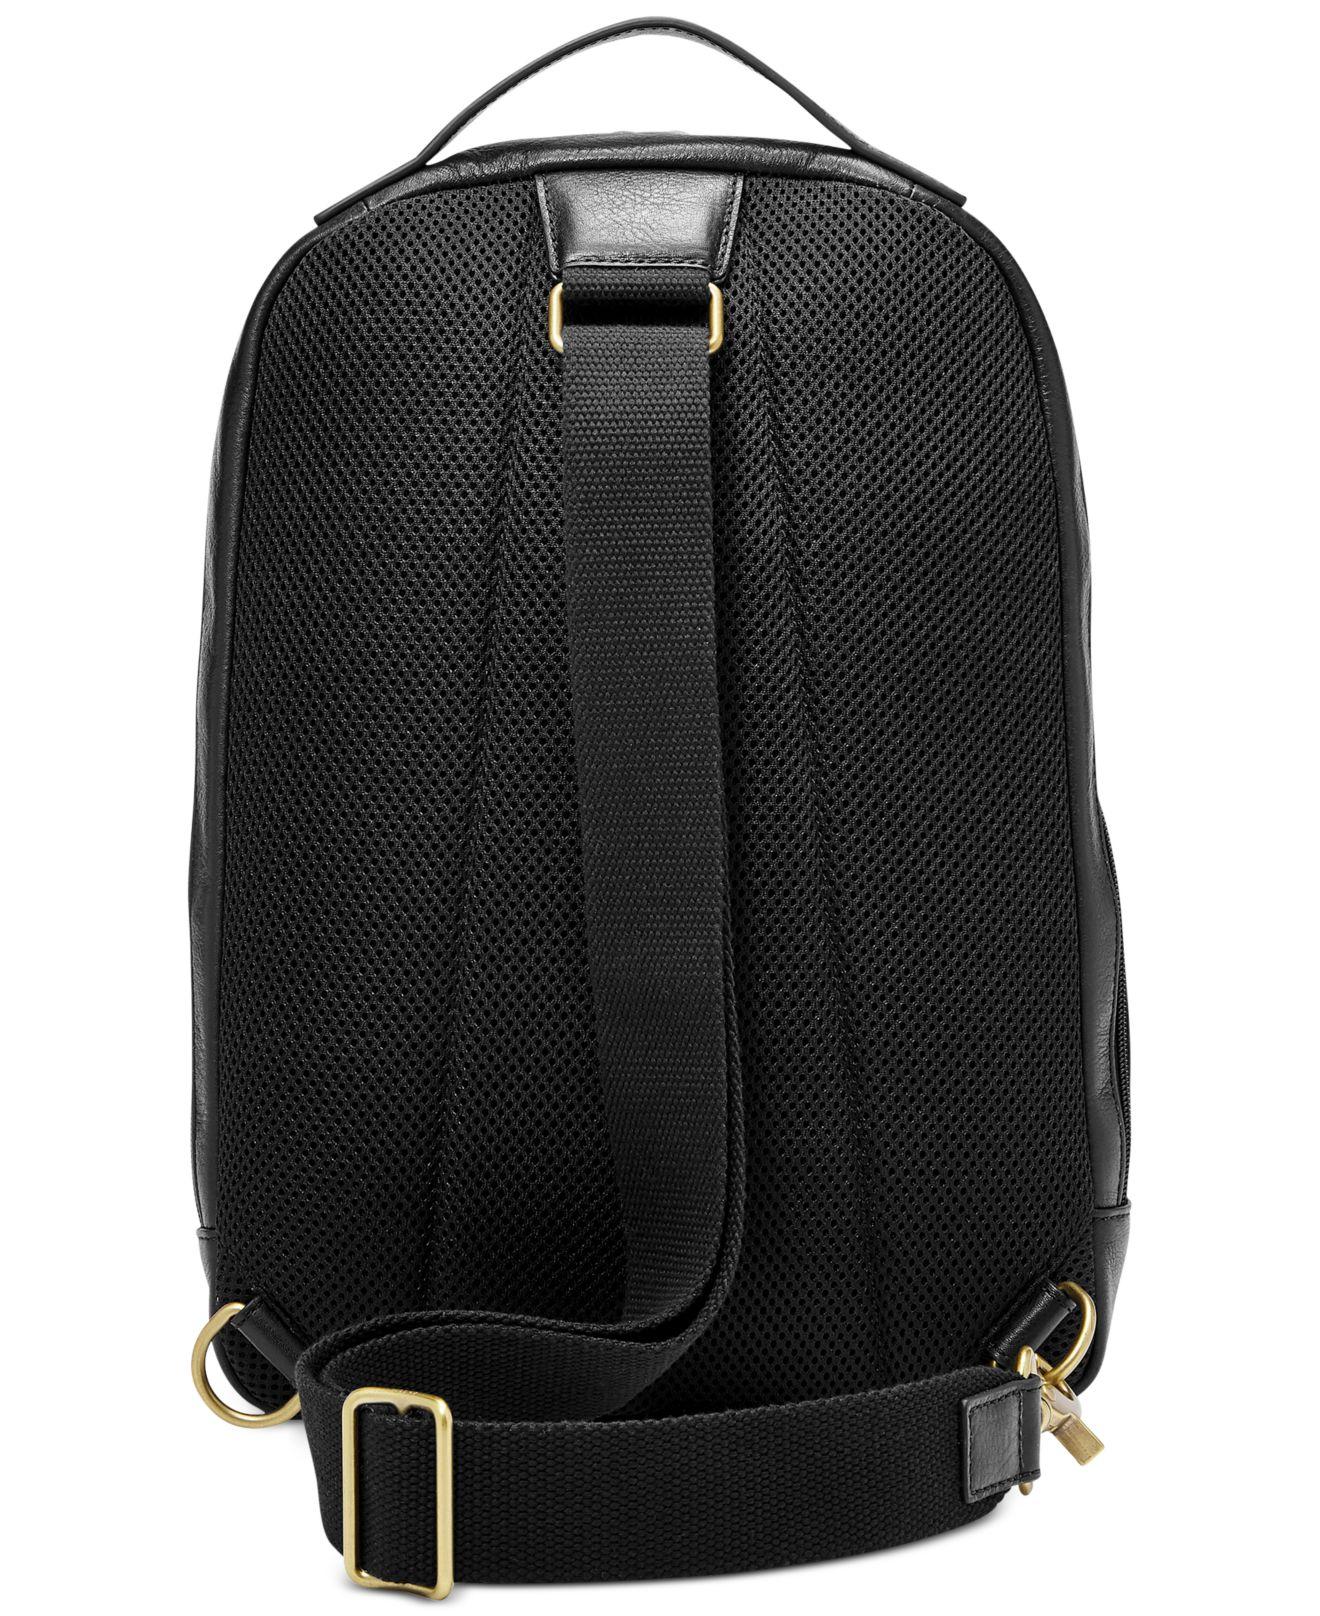 Fossil Abrams Leather Sling Backpack in Black for Men - Lyst